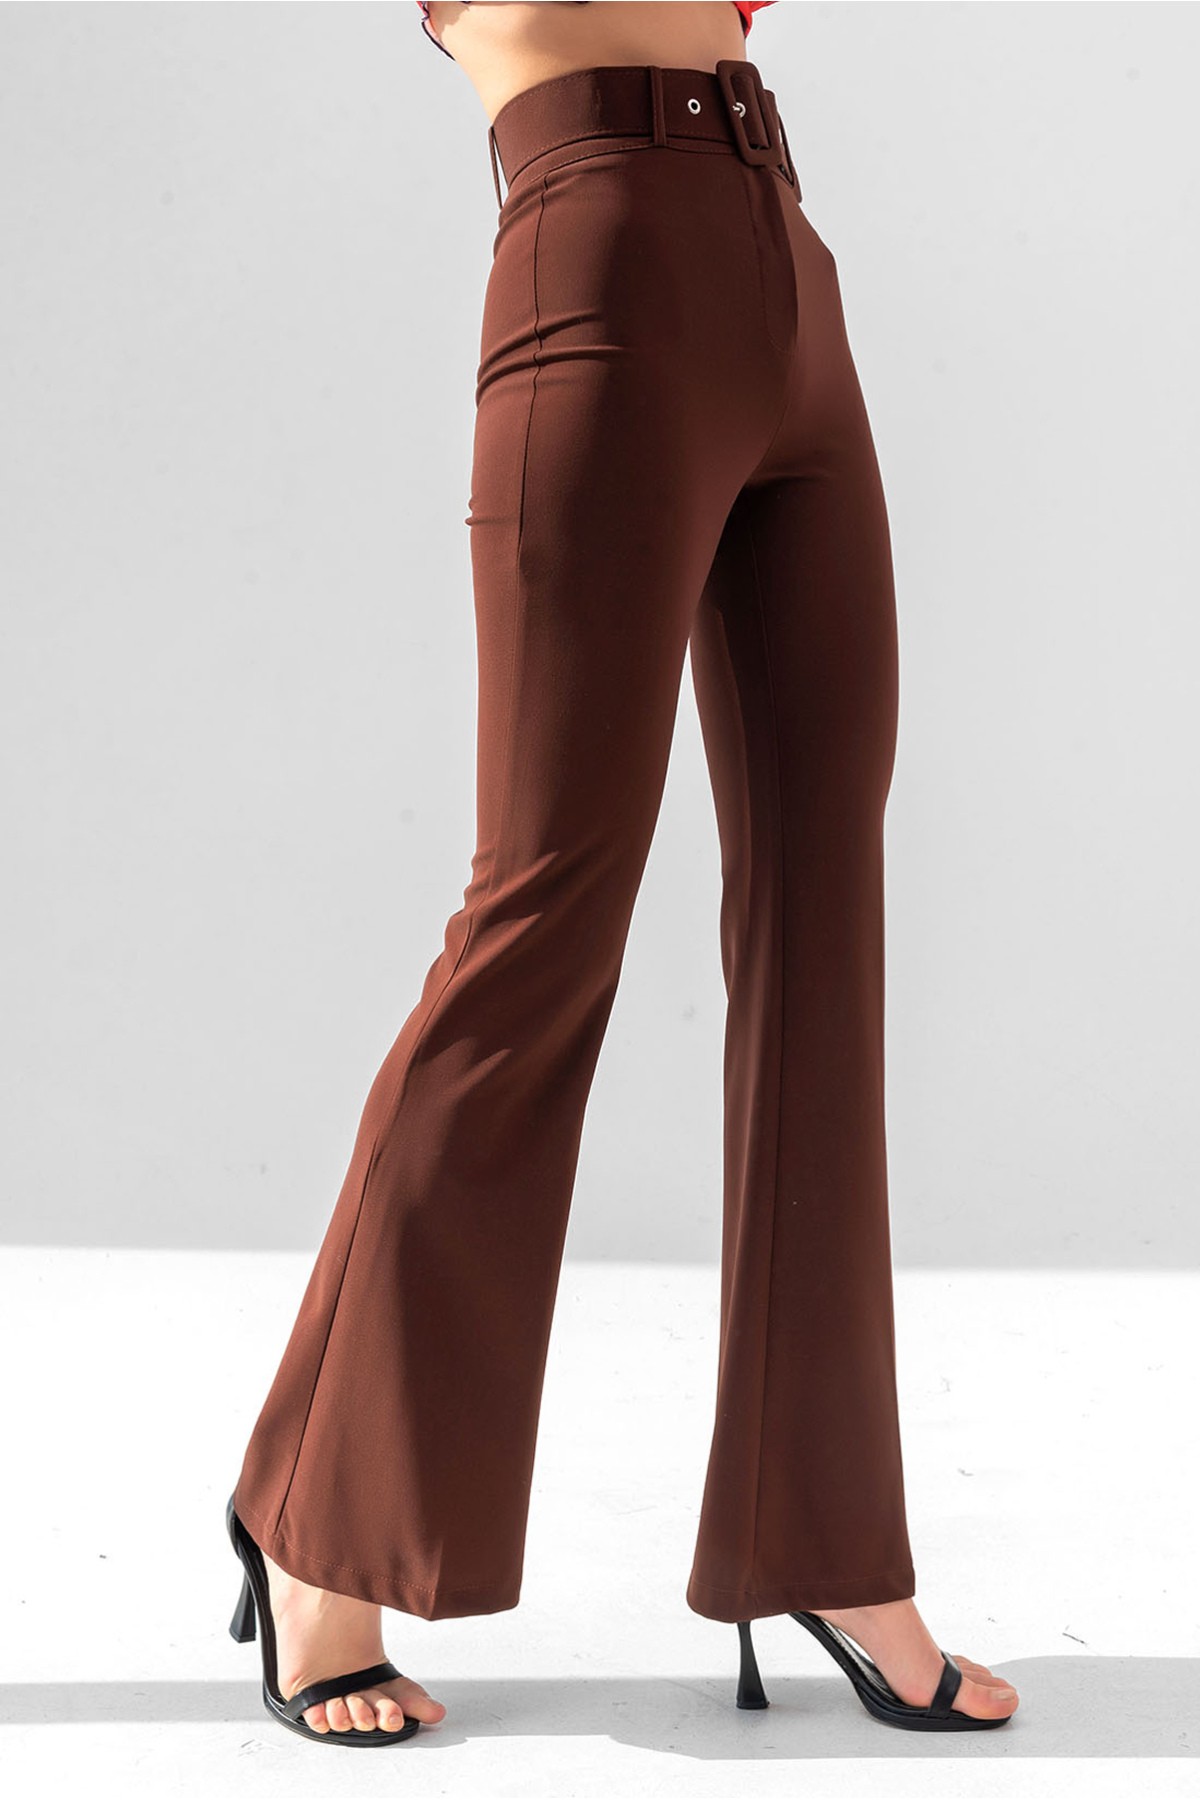 Women's Belted High Waist Flared Trousers - Earth Tone